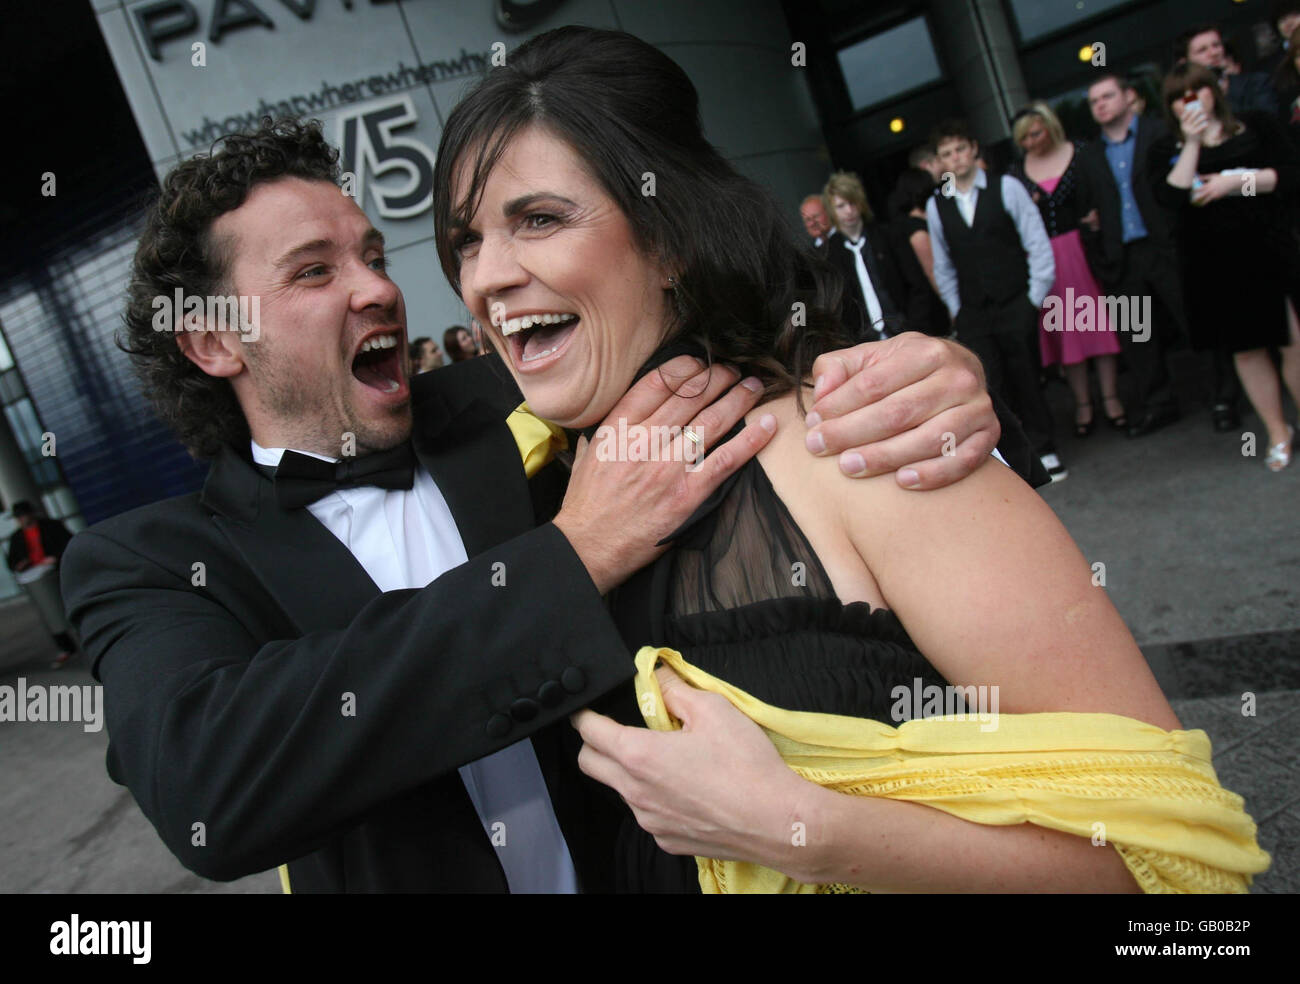 Actor Alan M Crawford and his wife actress Joe Crawford at the premiere of Northern Ireland's first zombie horror film 'The Battle of the Bone' at the Odyssey Arena, Belfast. Stock Photo